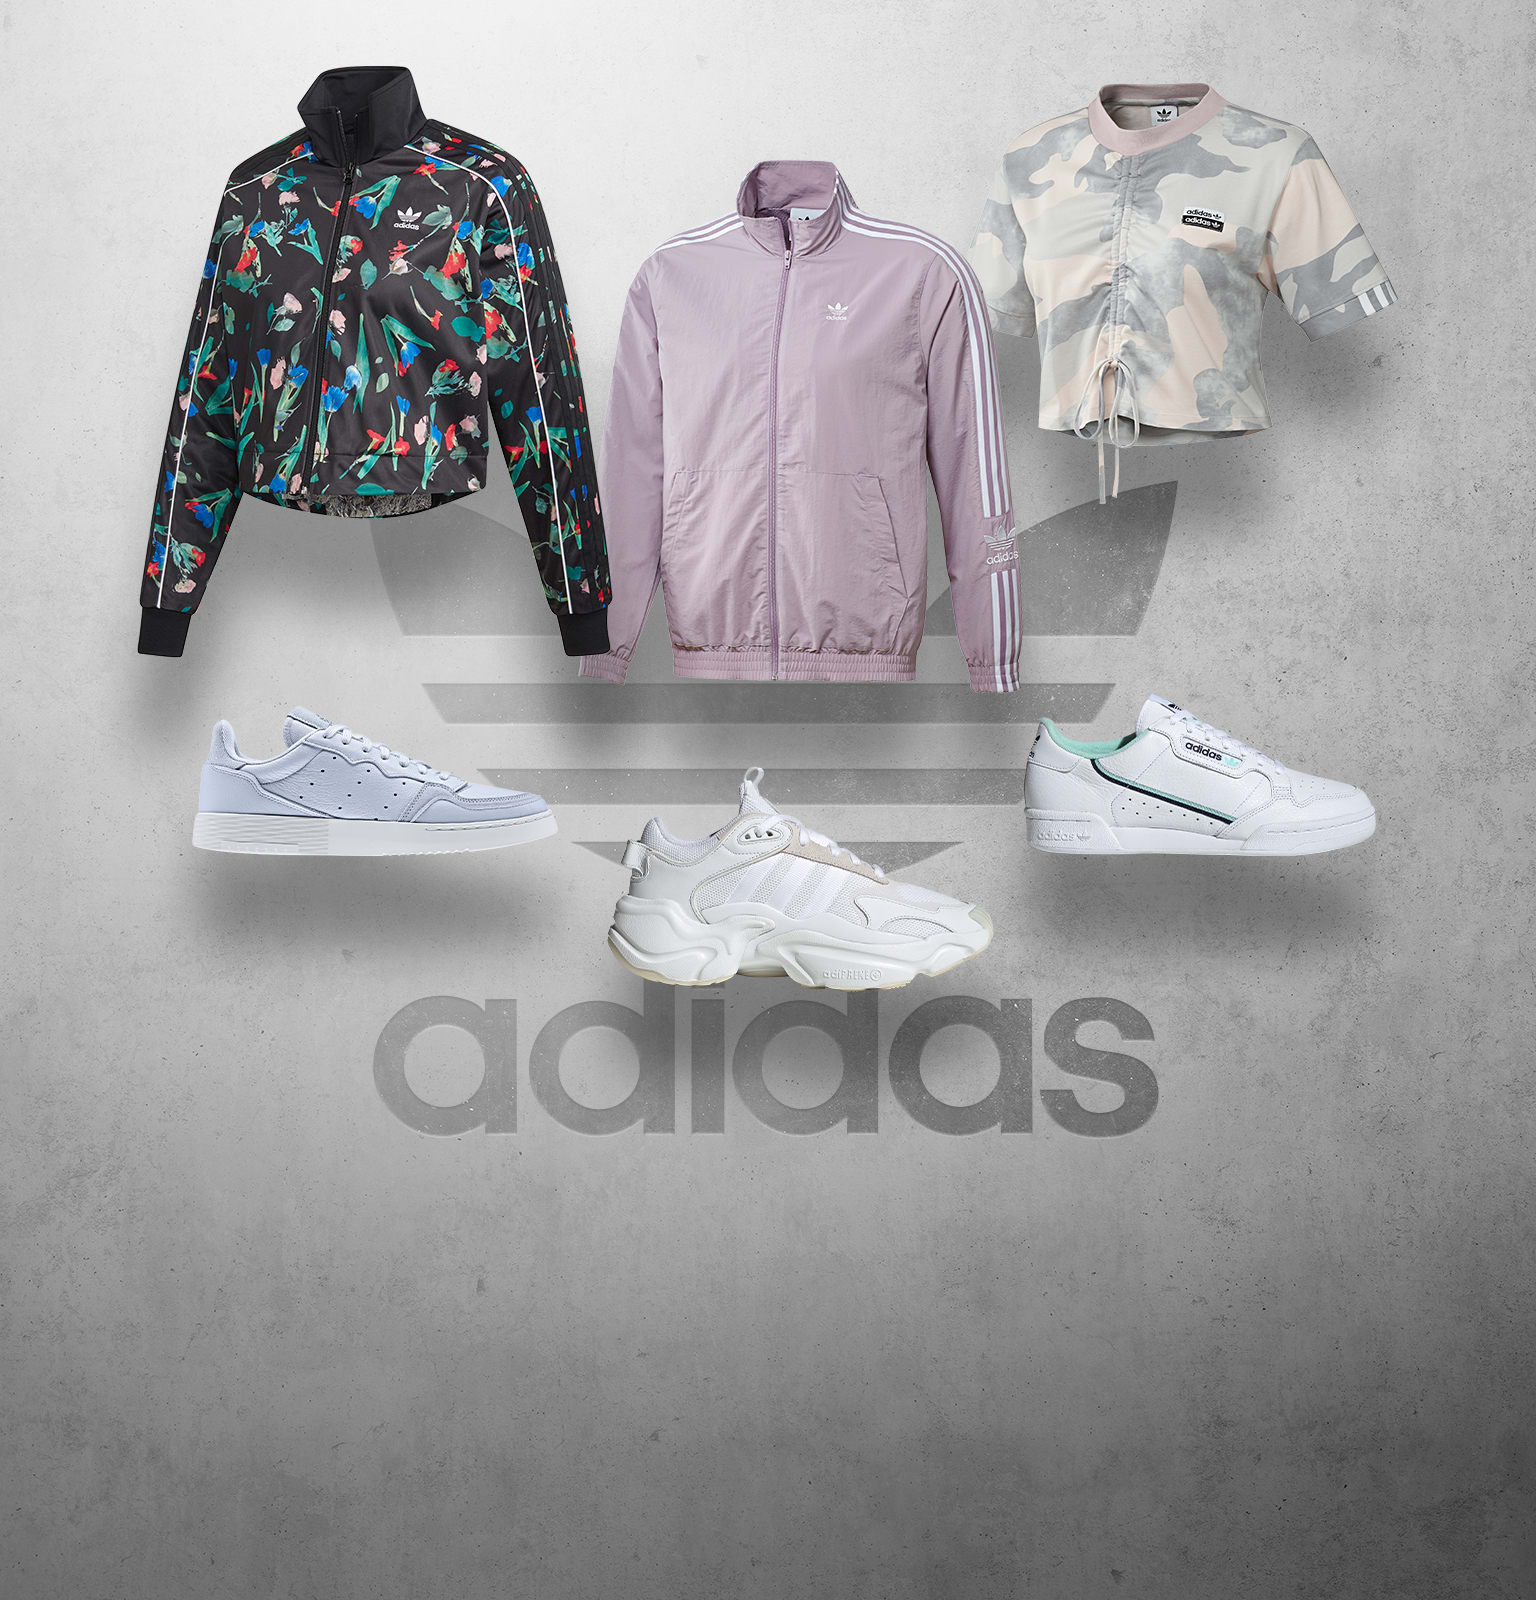 Promos | adidas outlet France